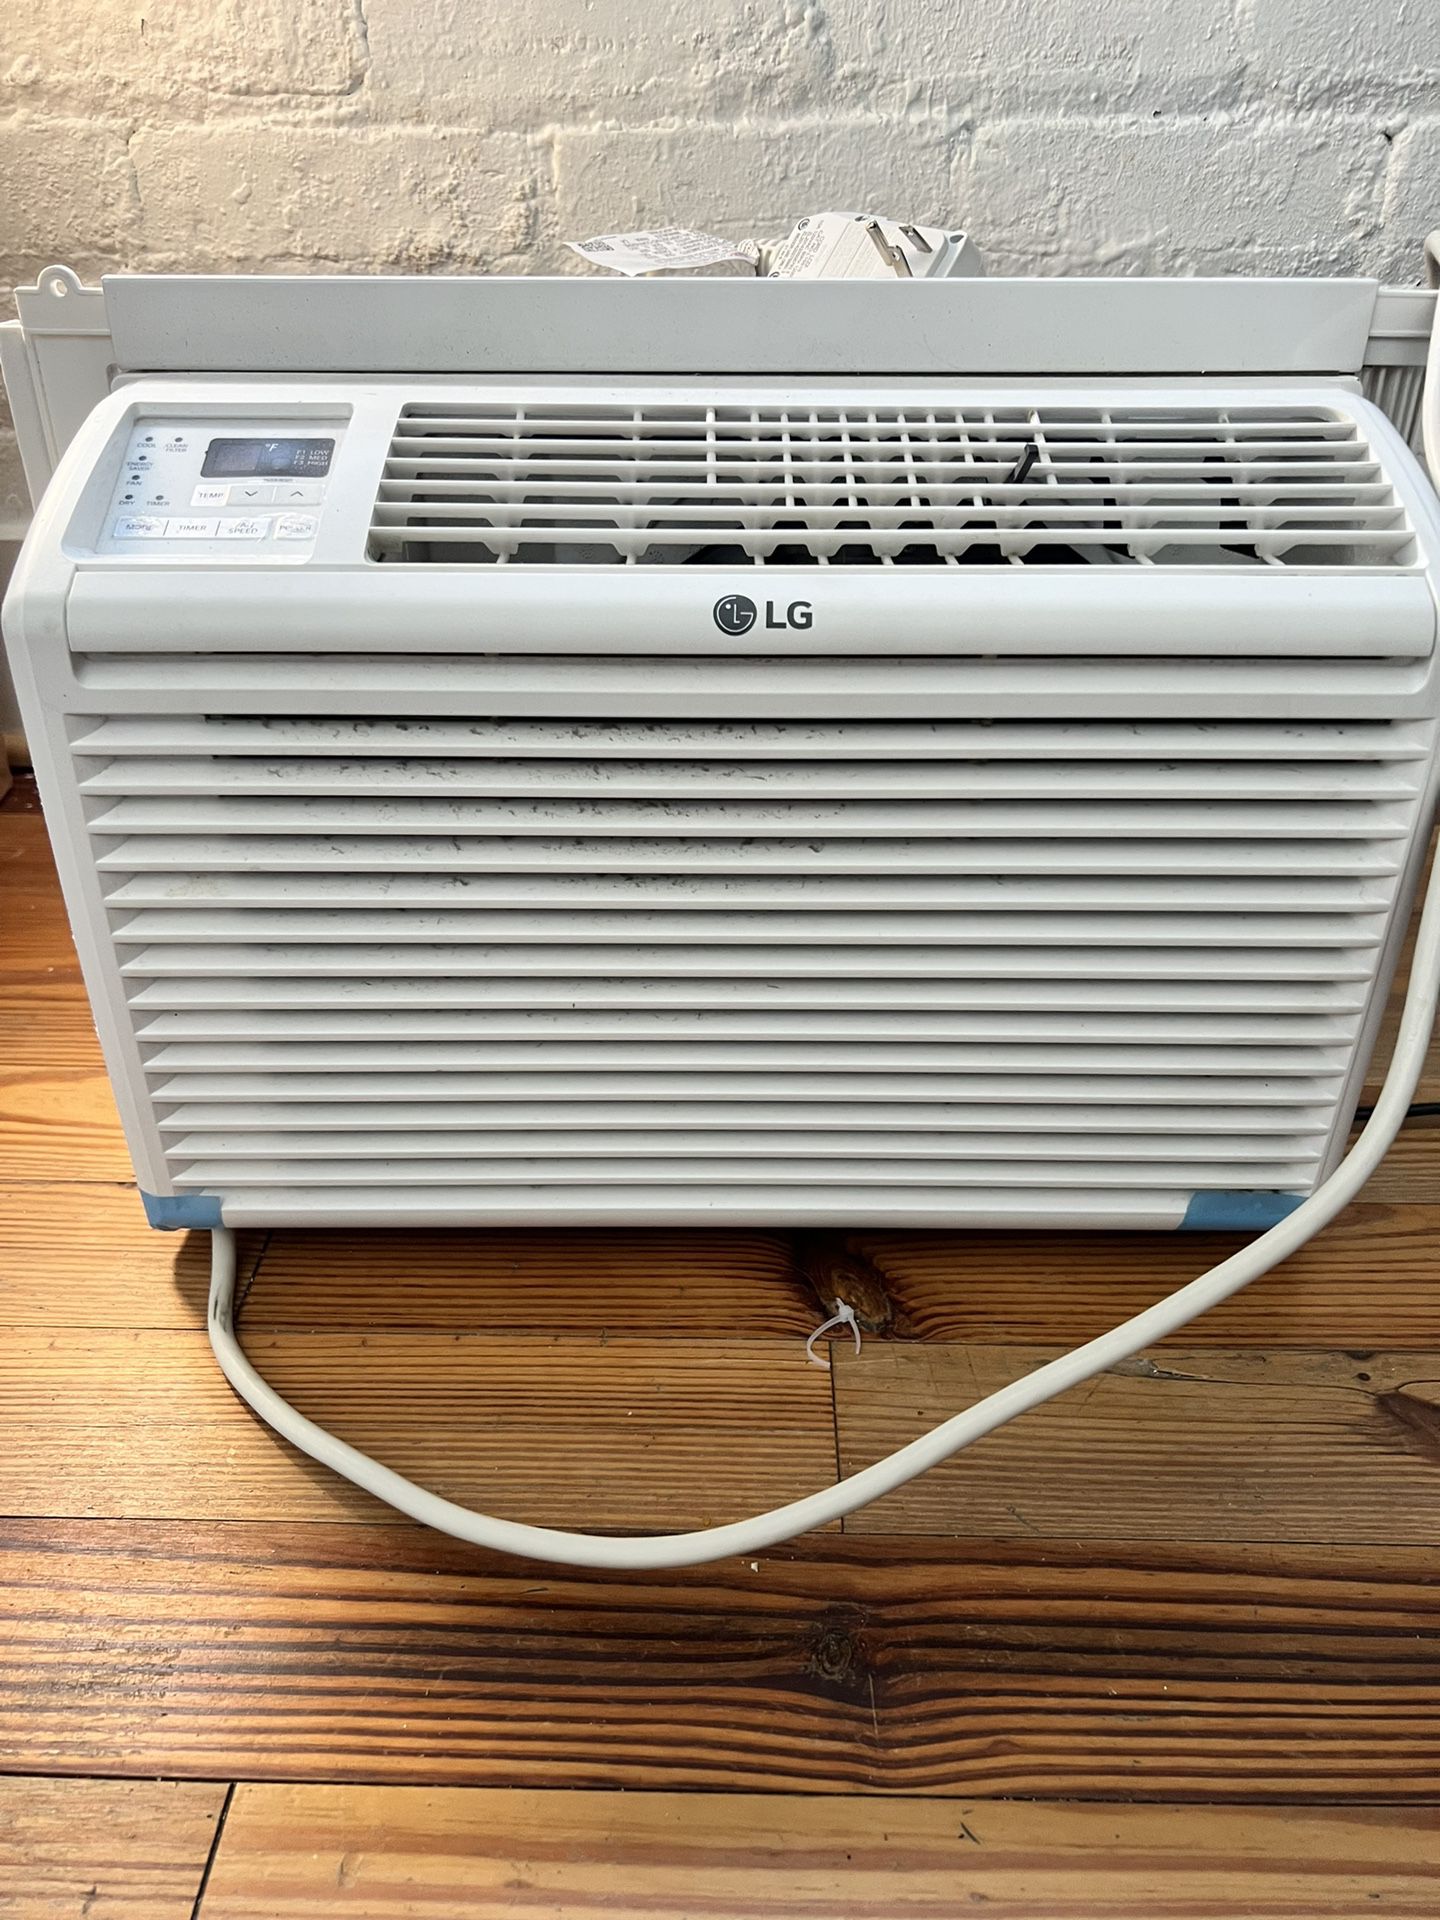 LG 6,000 BTU 115V Window Air Conditioner LW6017R Cools 250 Sq. Ft. with Remote Control in White